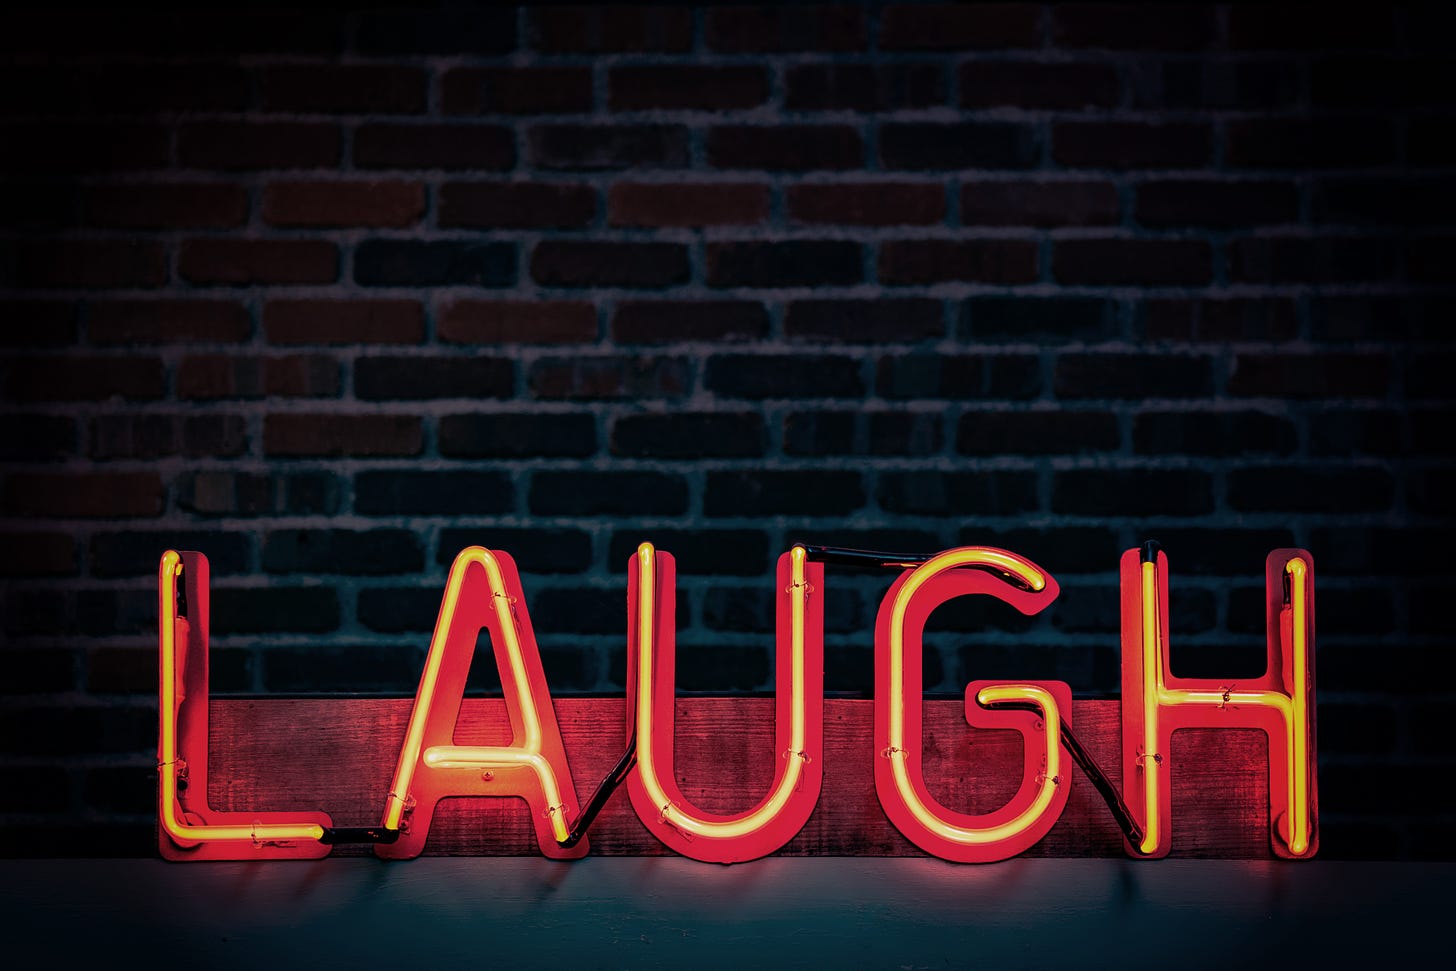 A red sign that says "Laugh."